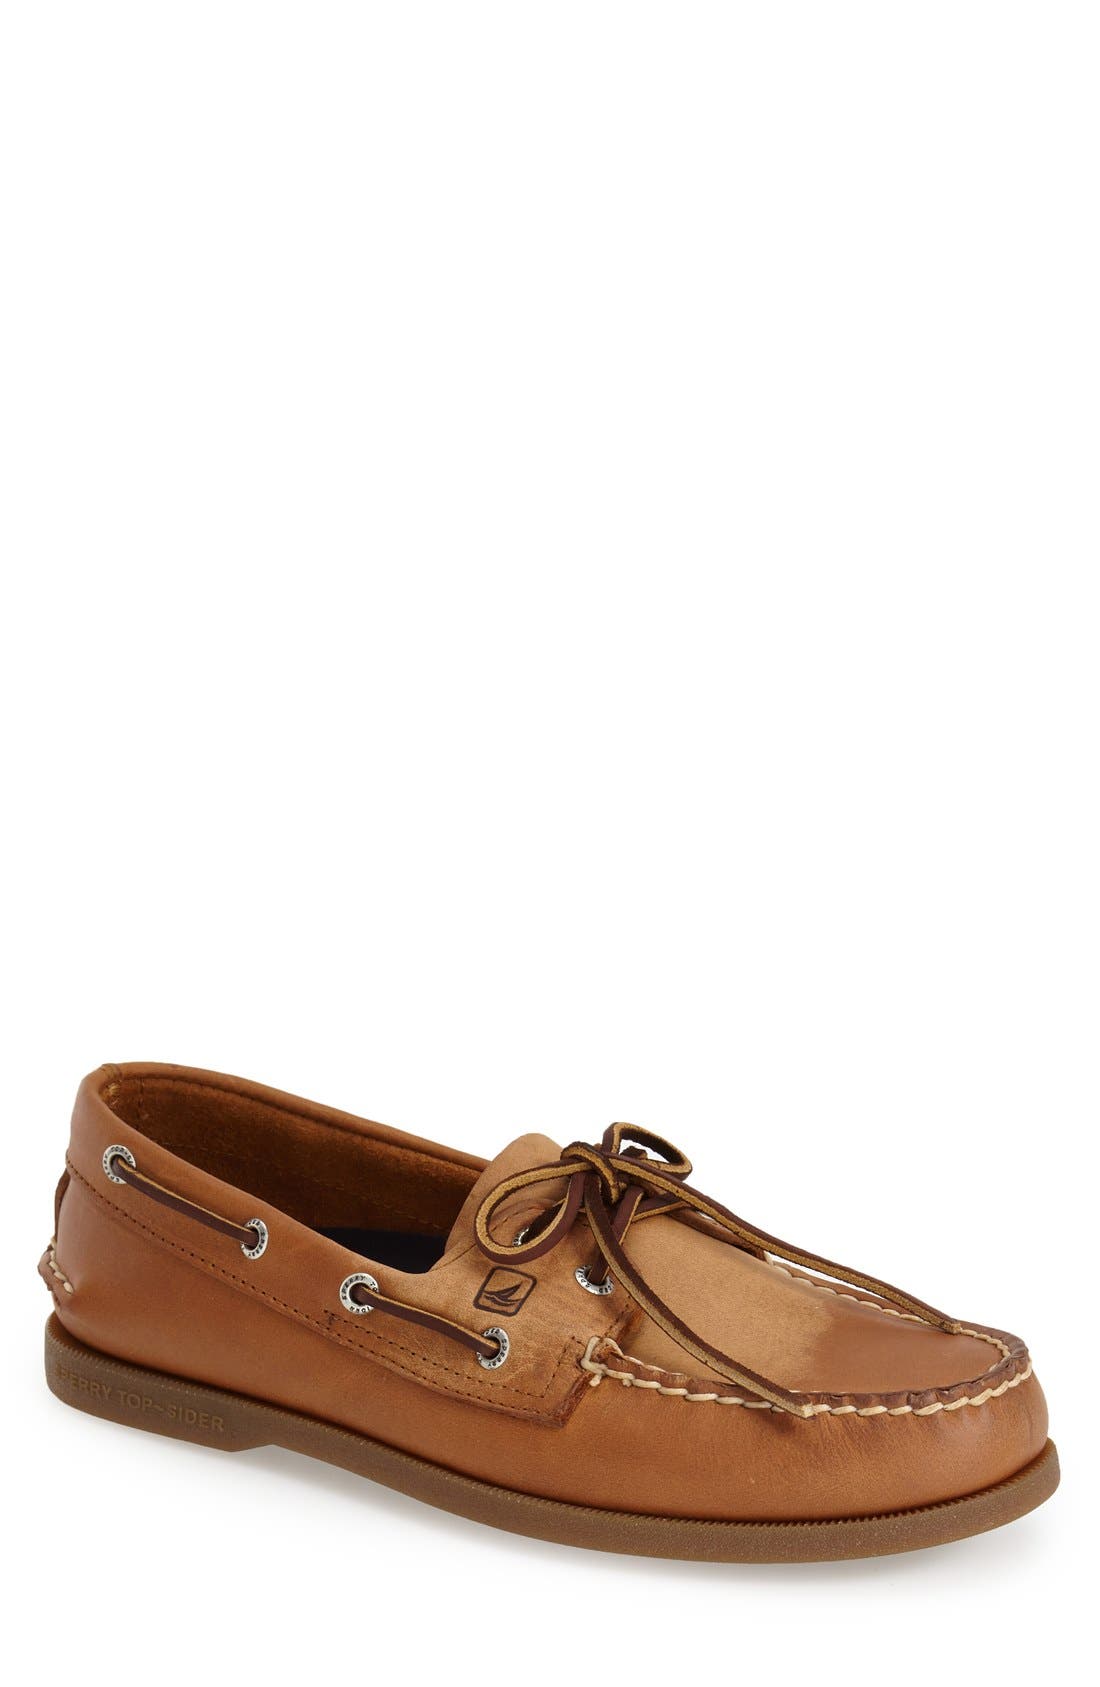 mens sperry sandals sale